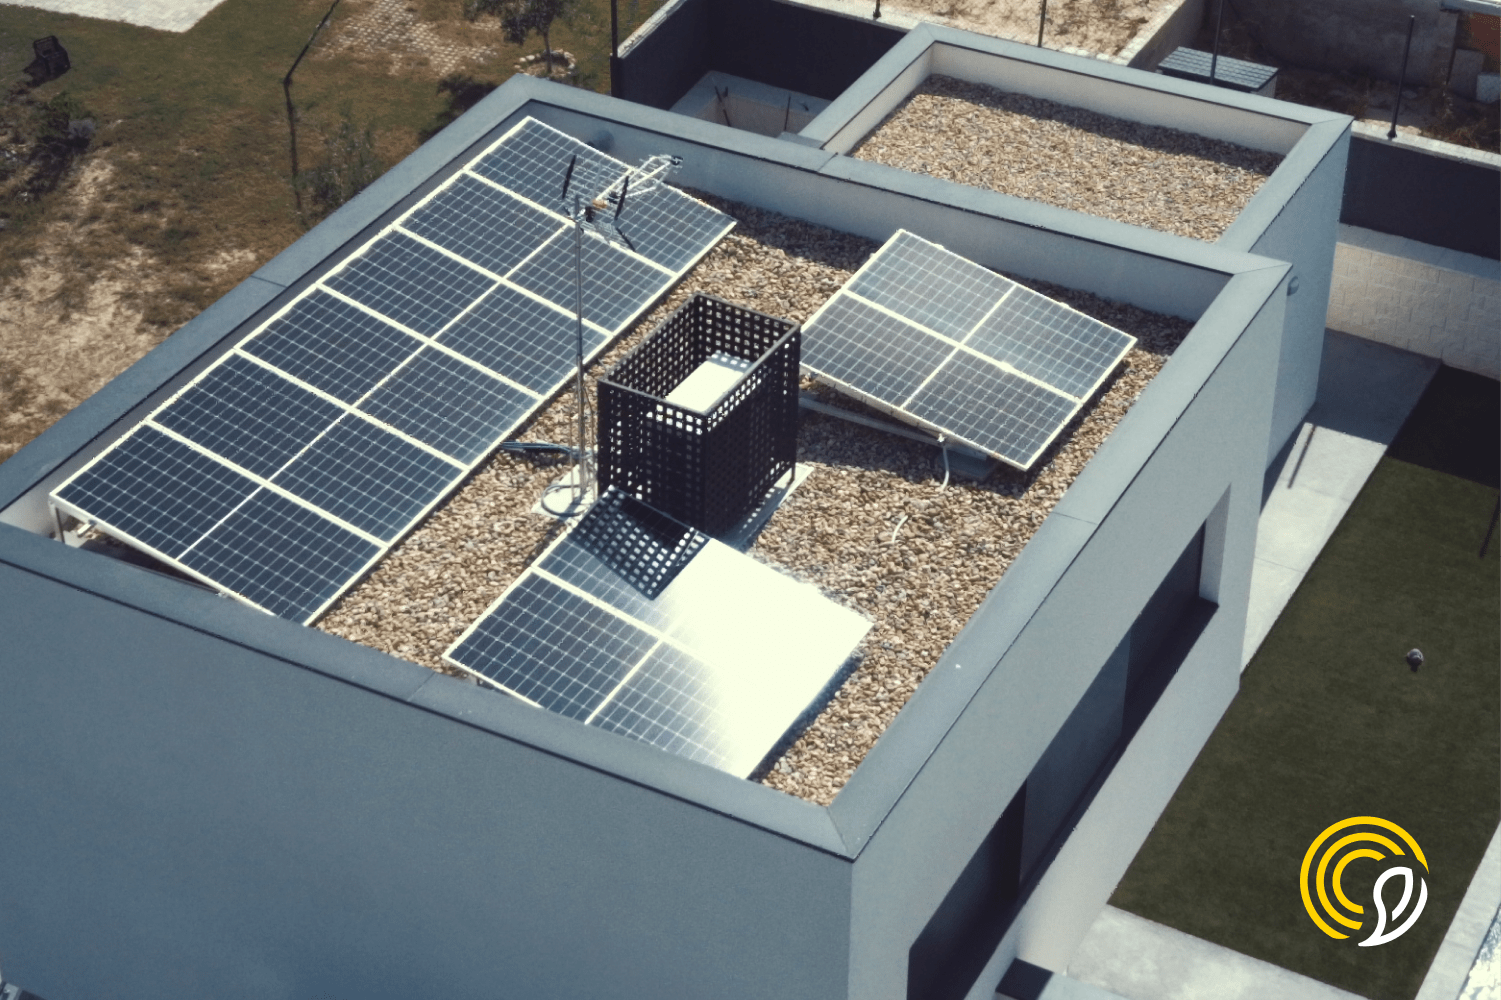 How to design a photovoltaic system